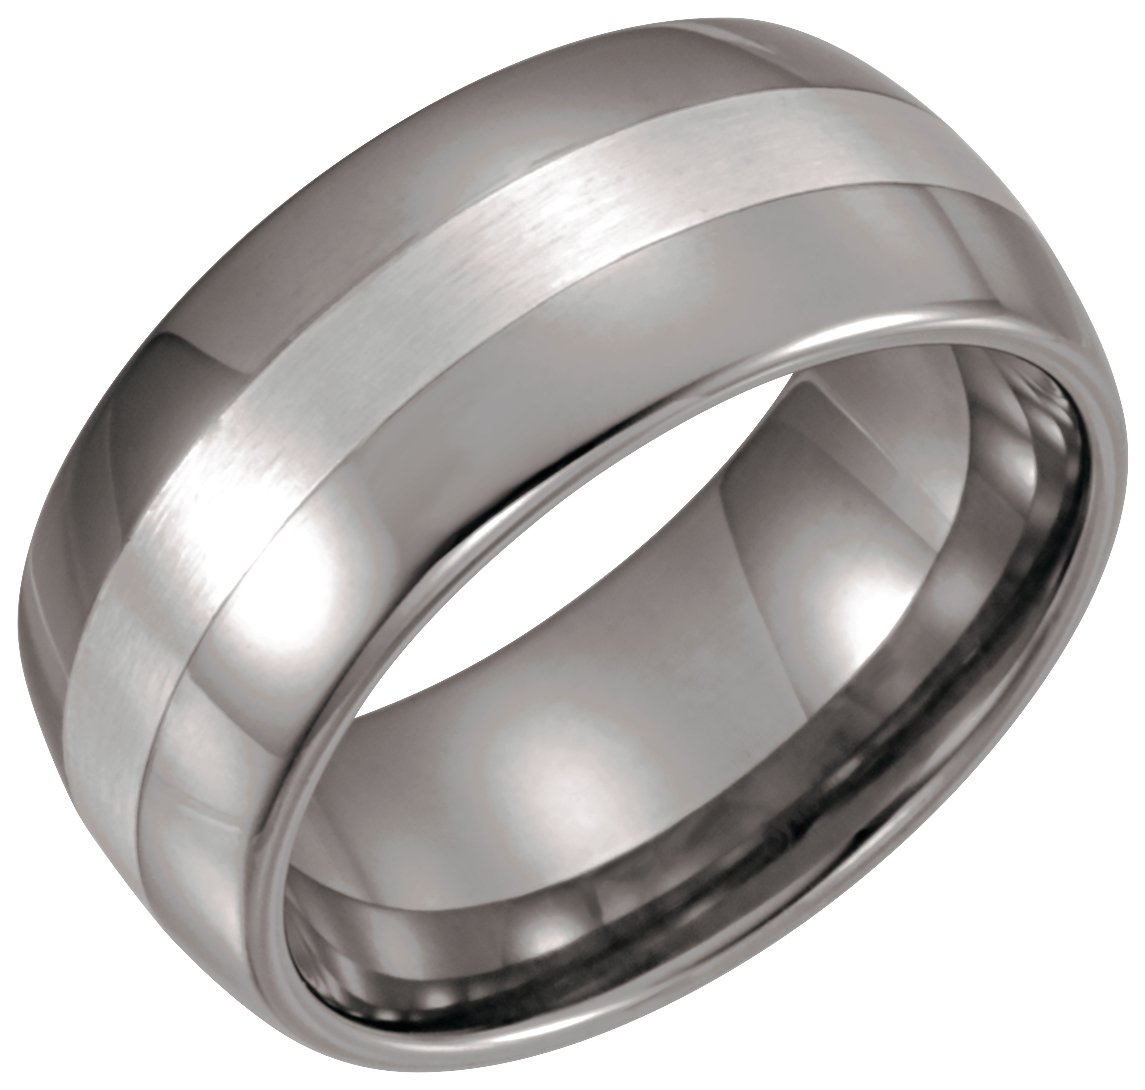 Tungsten 10 mm Domed Band with Sterling Silver Inlay Size 10.5